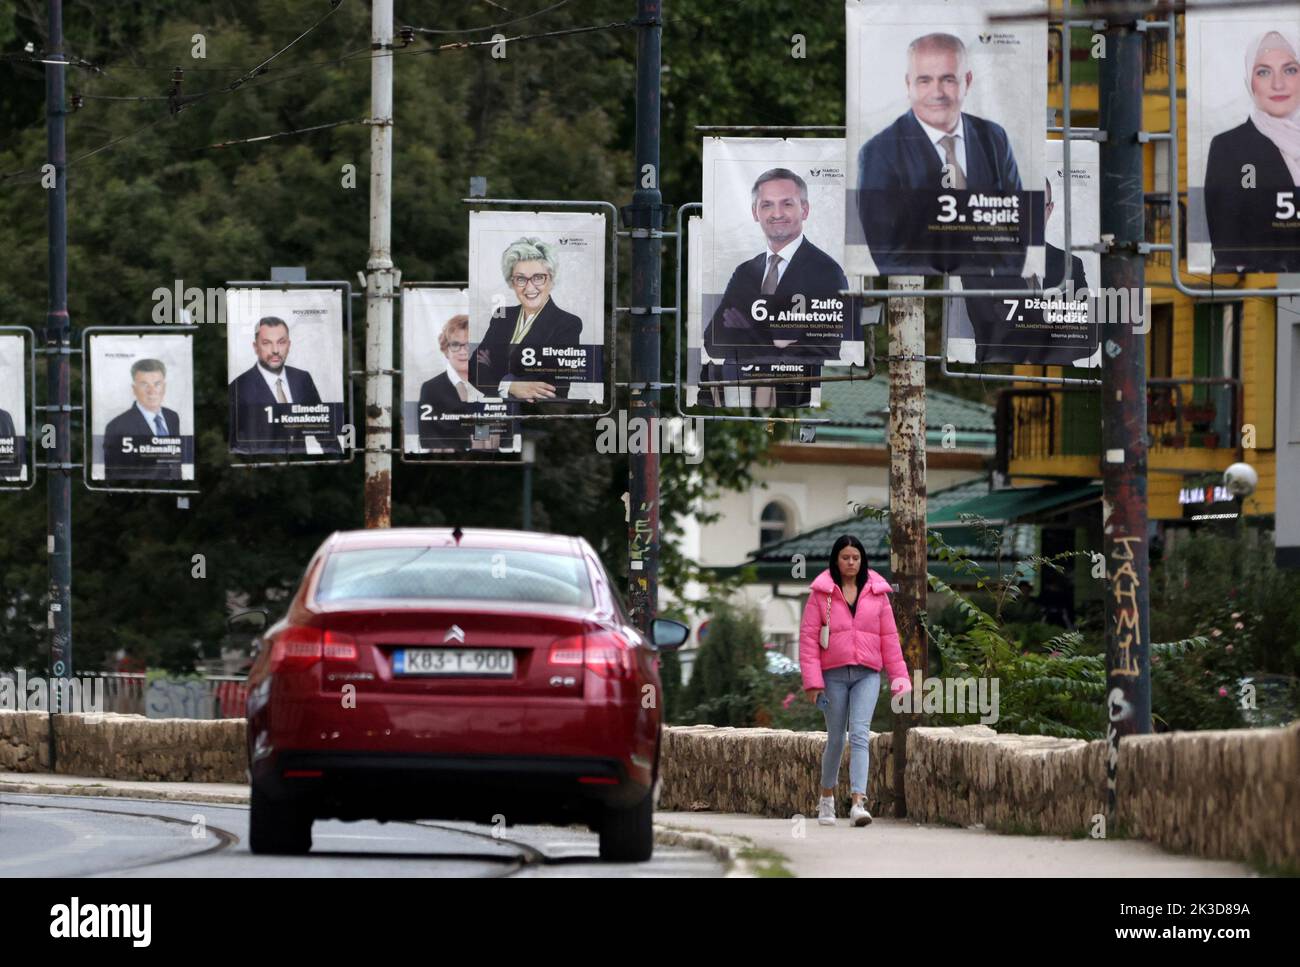 A woman walks past election posters in Sarajevo, Bosnia, September 25, 2022. REUTERS/Dado Ruvic Stock Photo